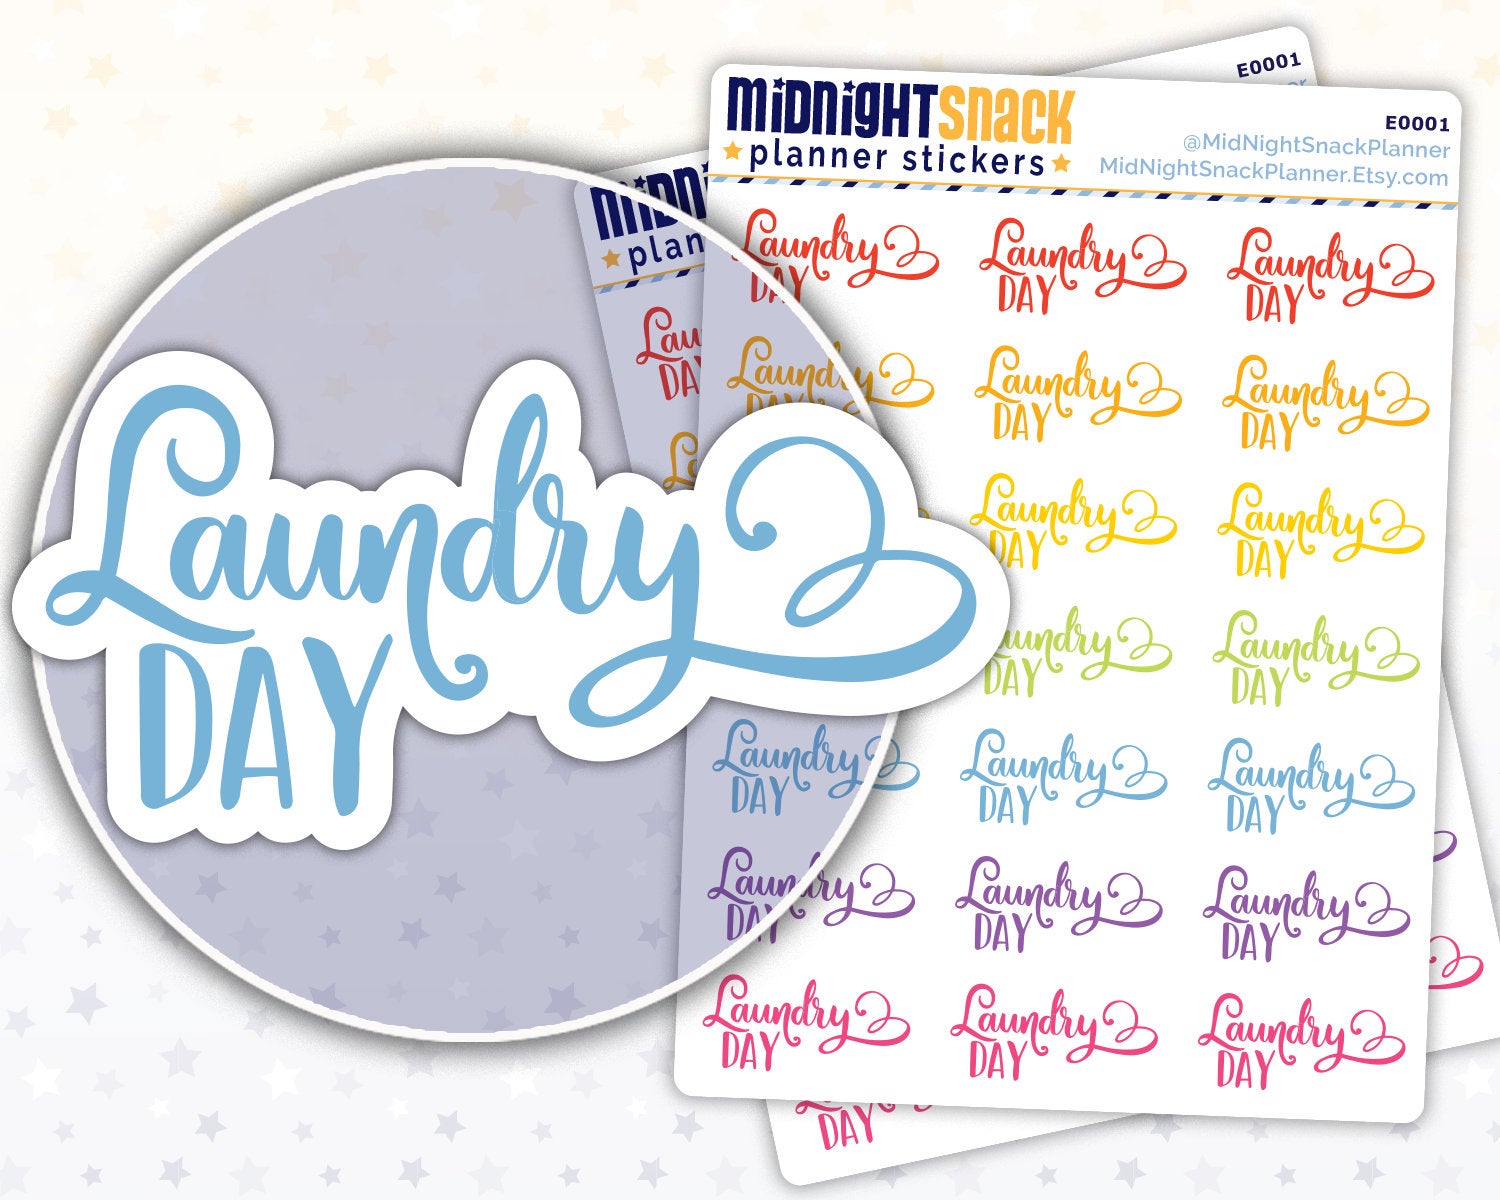 Laundry Day Script Planner Stickers Midnight Snack Planner